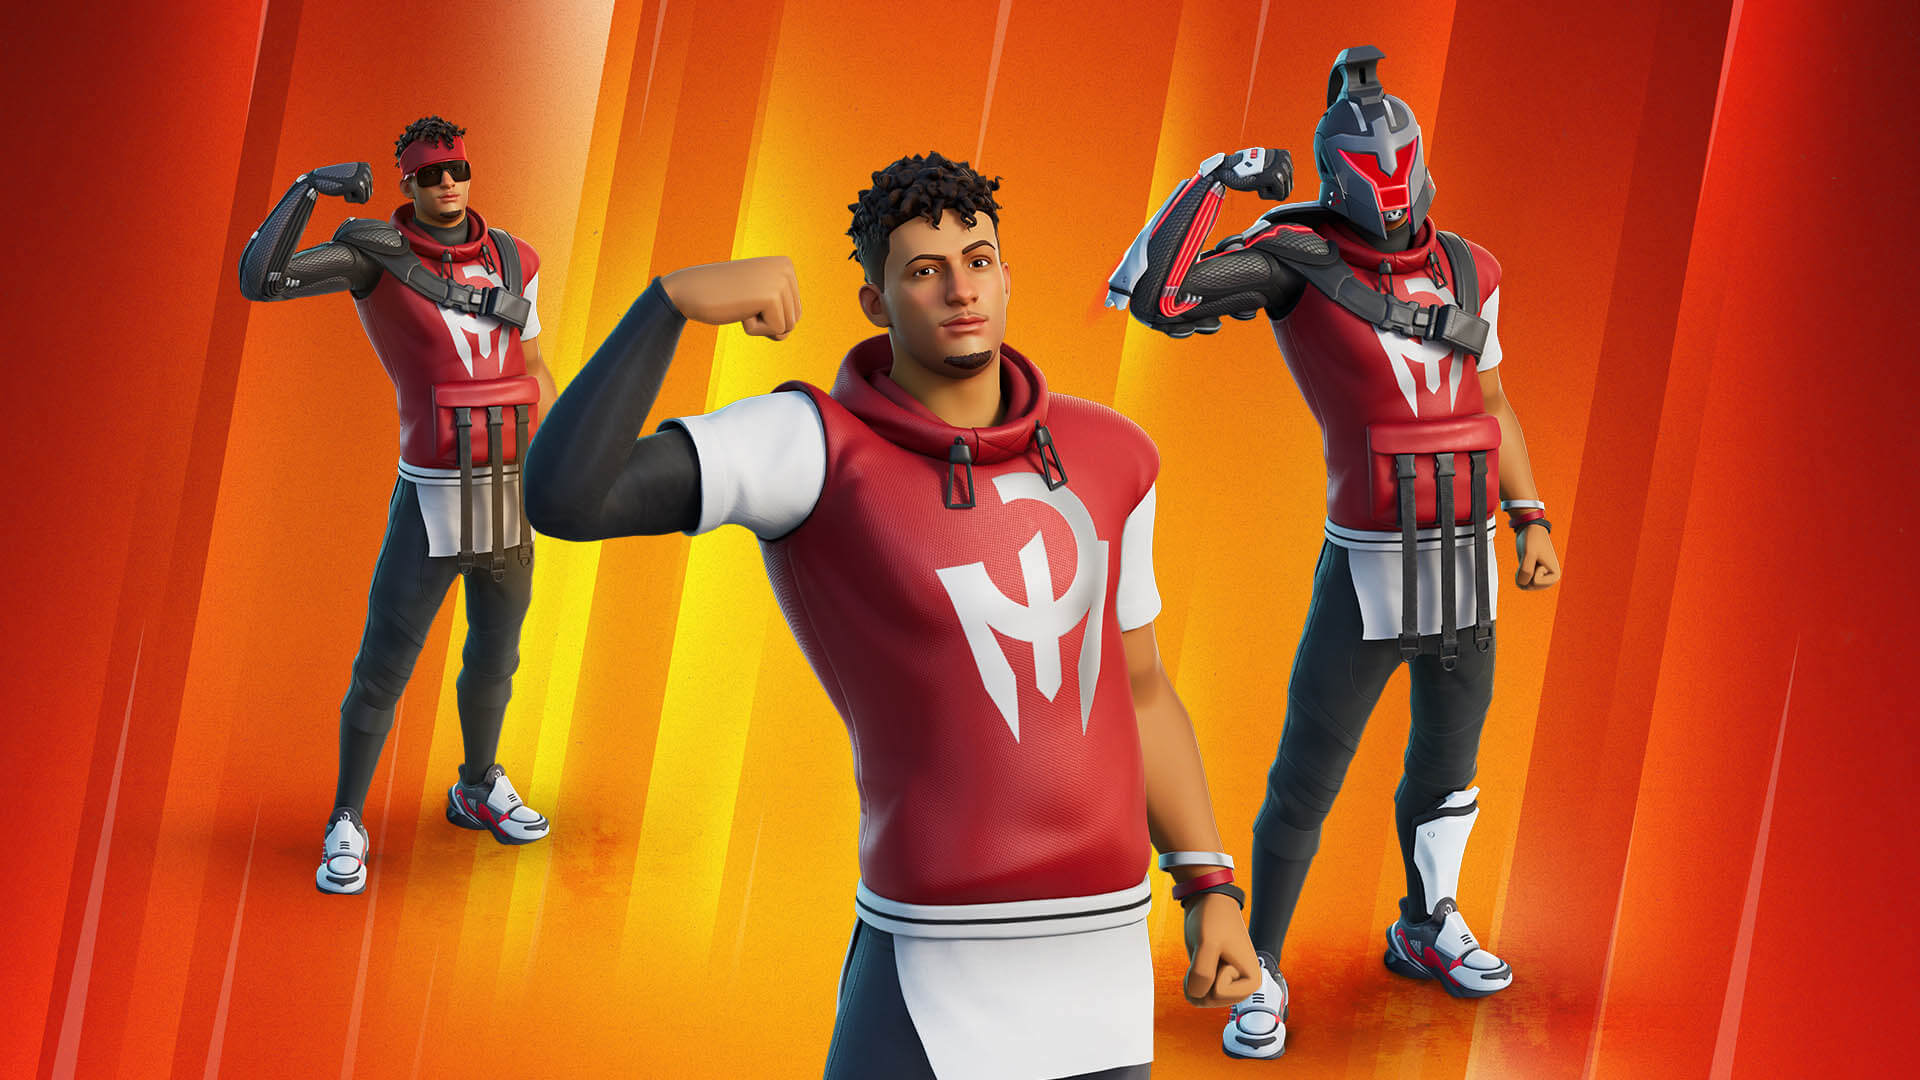 Patrick Mahomes was what number athlete to get their own Icon series skin in Fortnite?